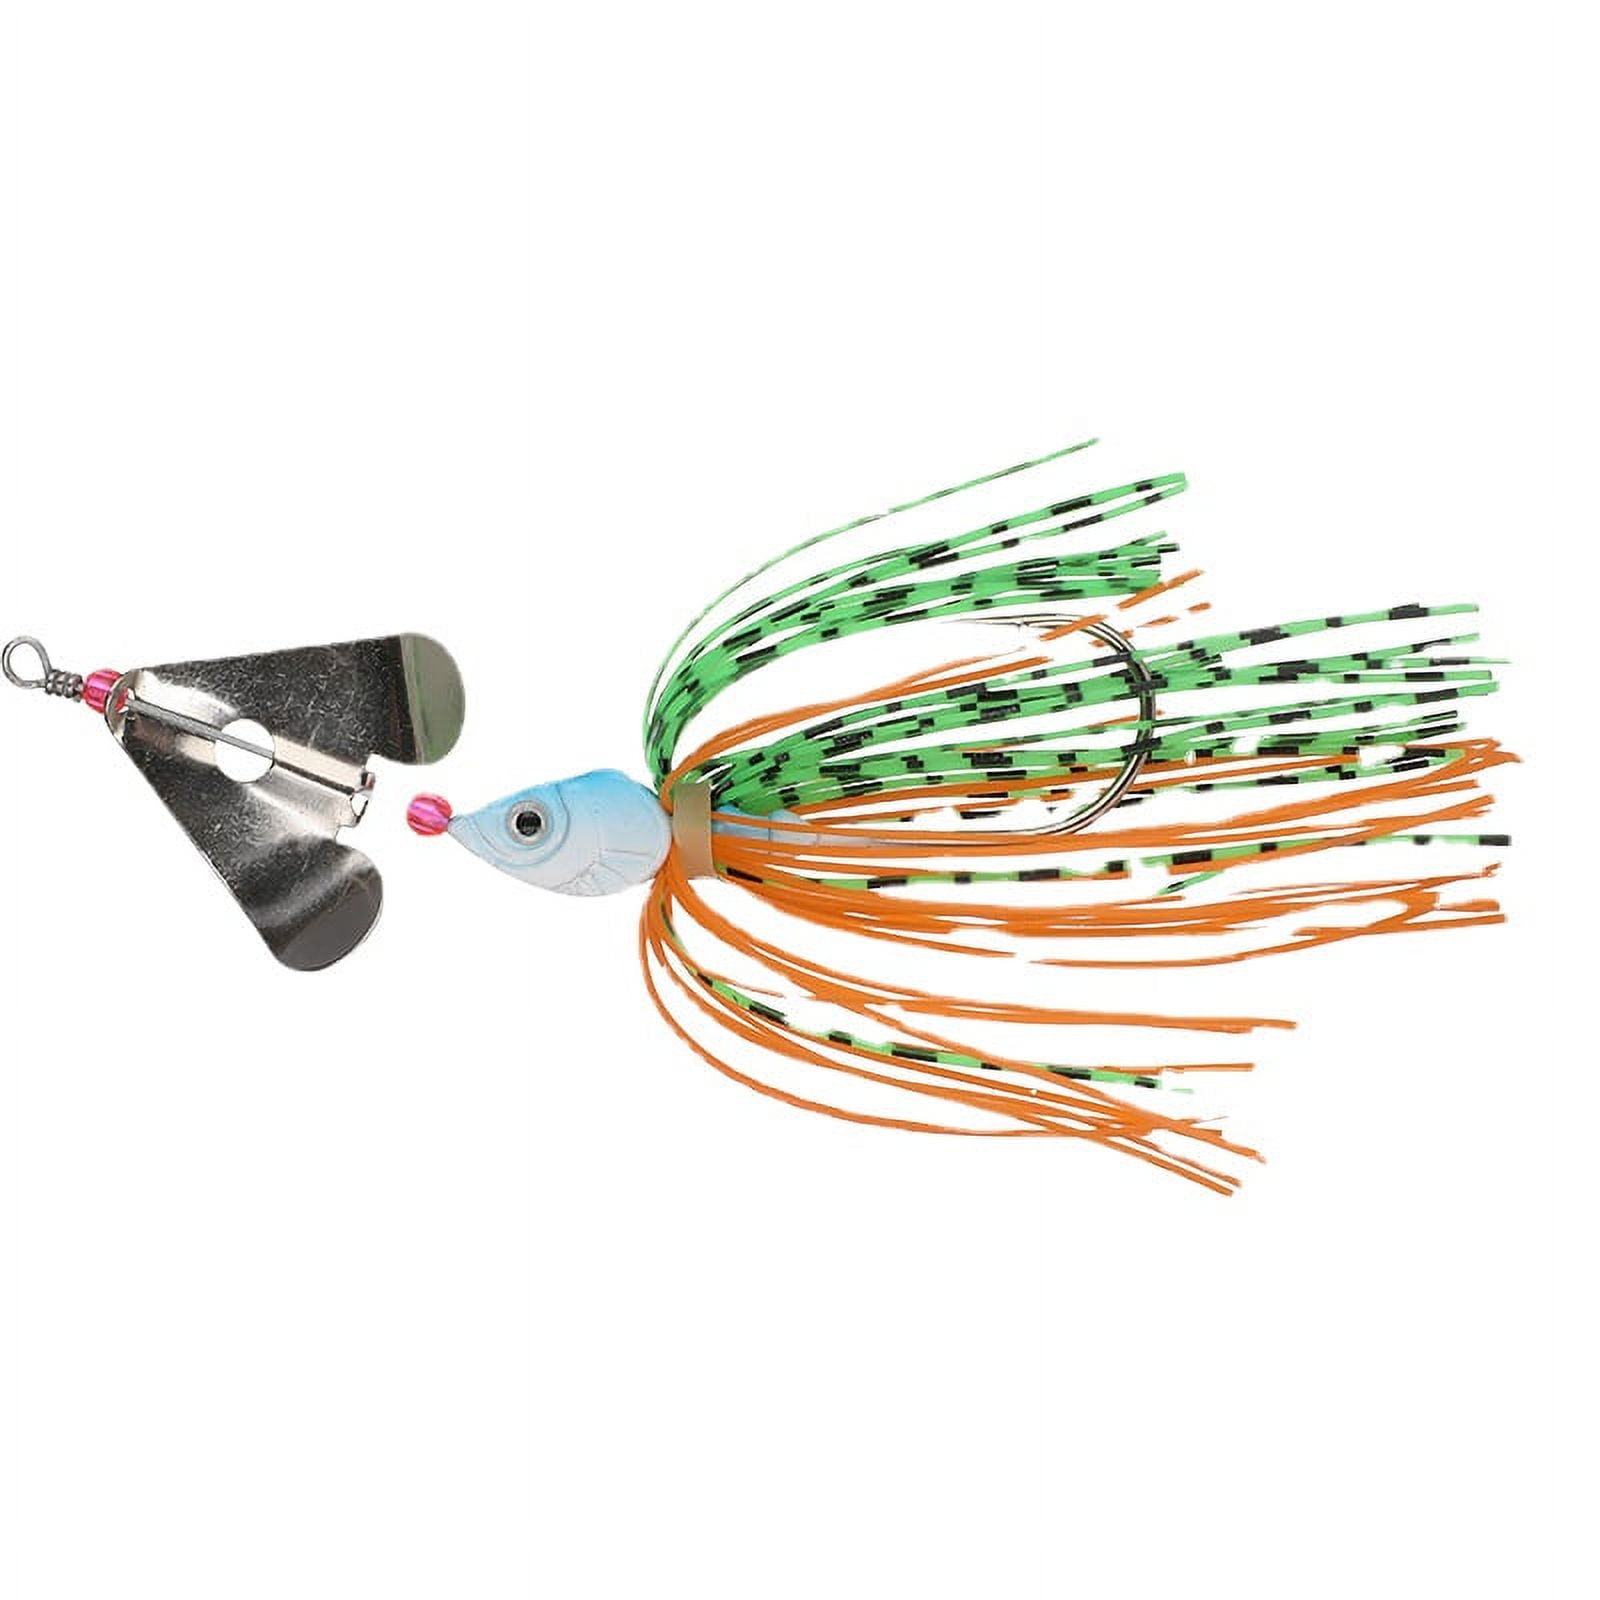 HCXIN Surface System Noise Piece Whisker Guy Bionic Compound Rotating  glitter noise bait fish false bait bass warping mouth